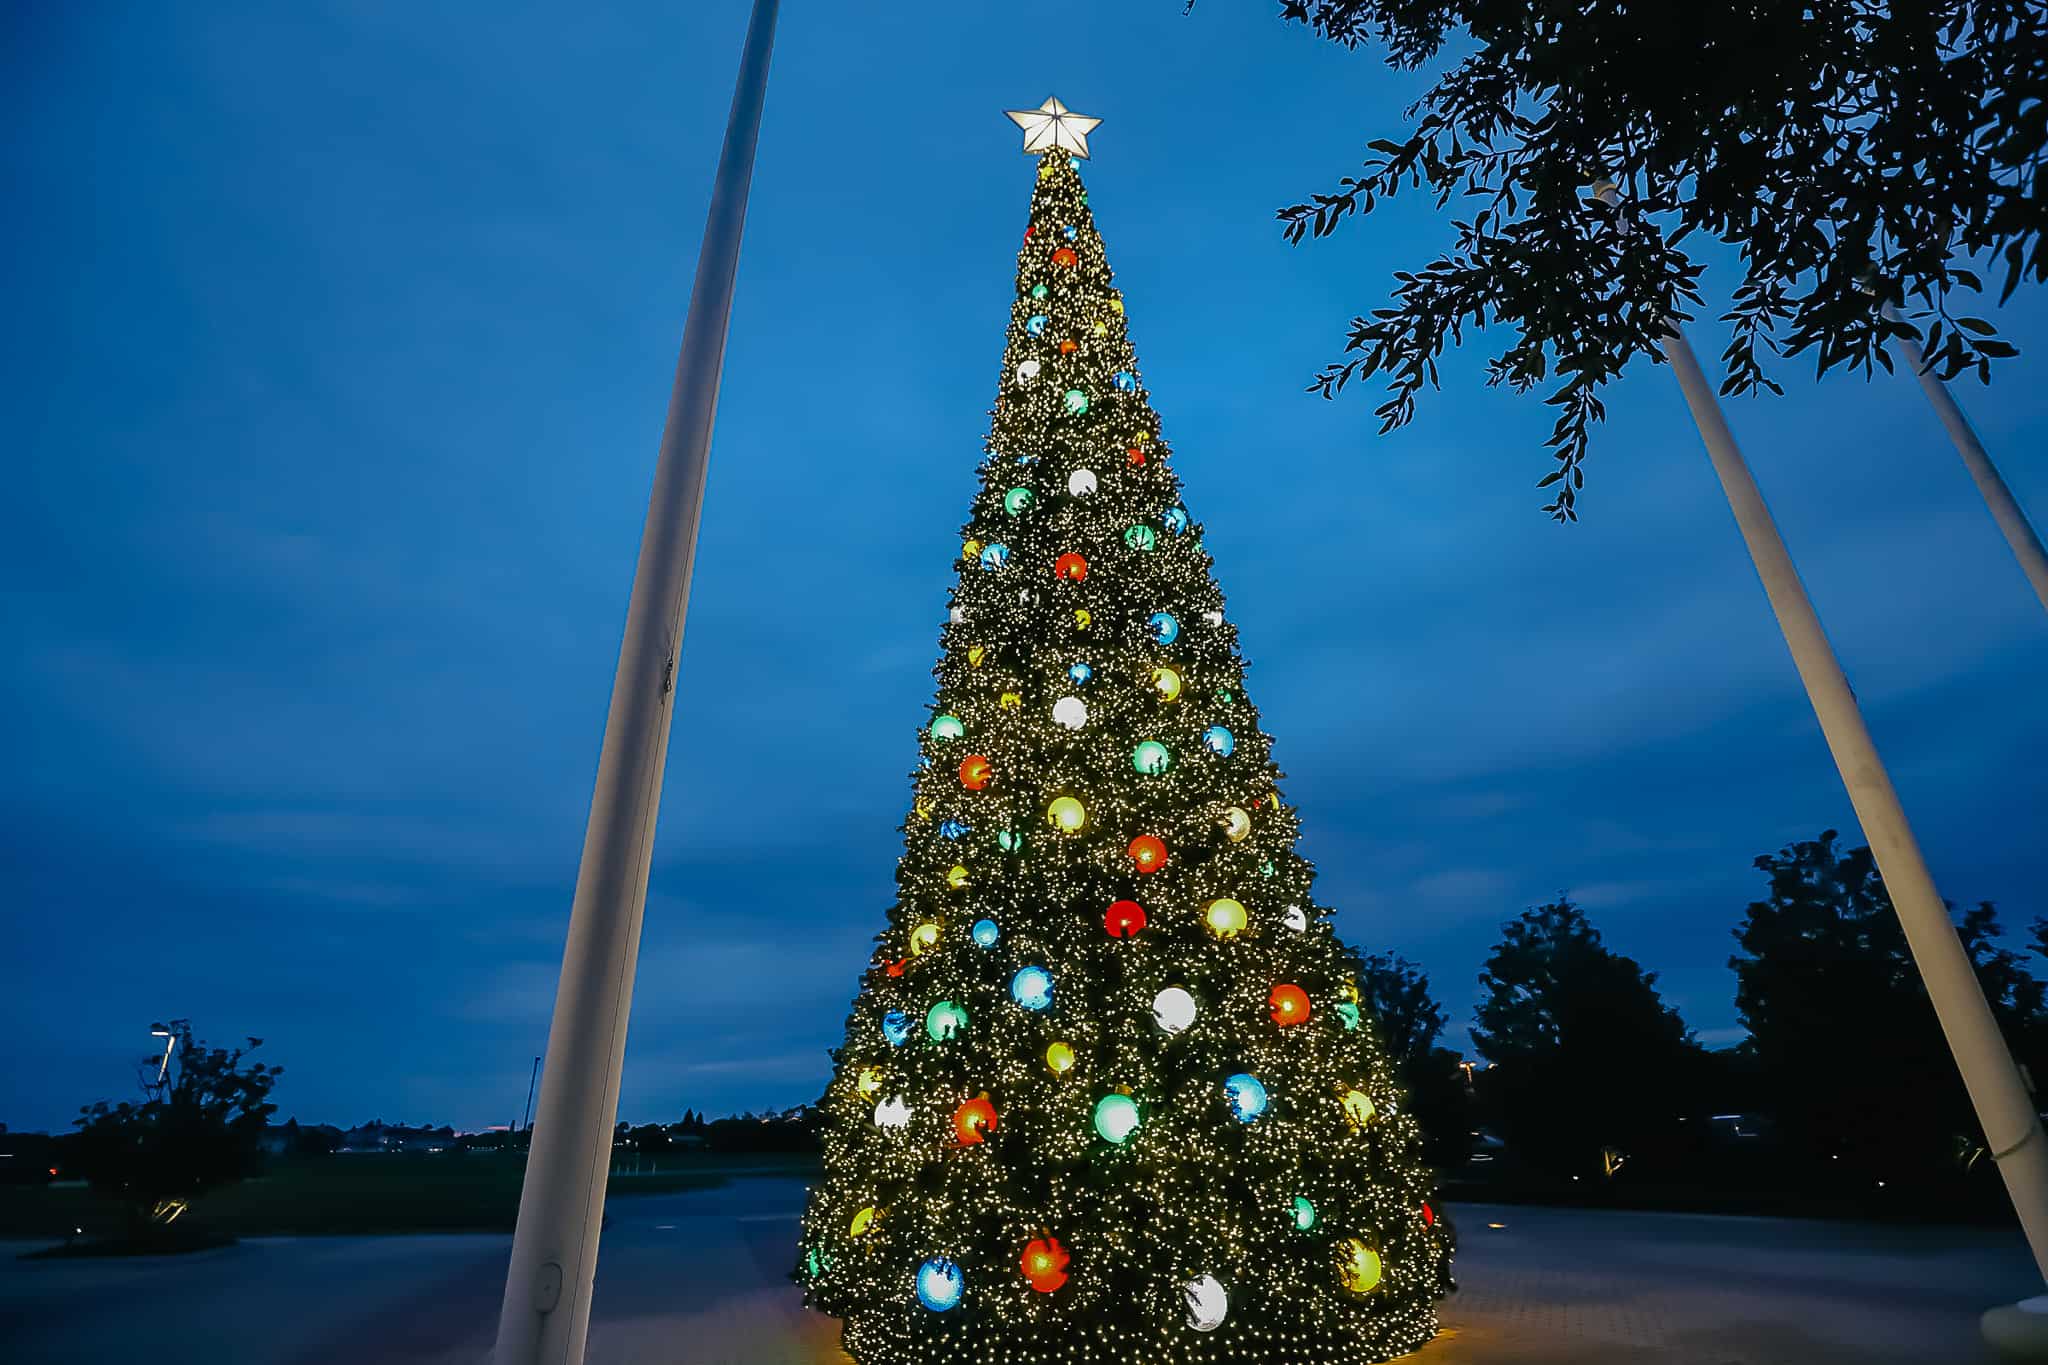 The large Christmas tree with colored globe lights outside of Disney's Contemporary. 